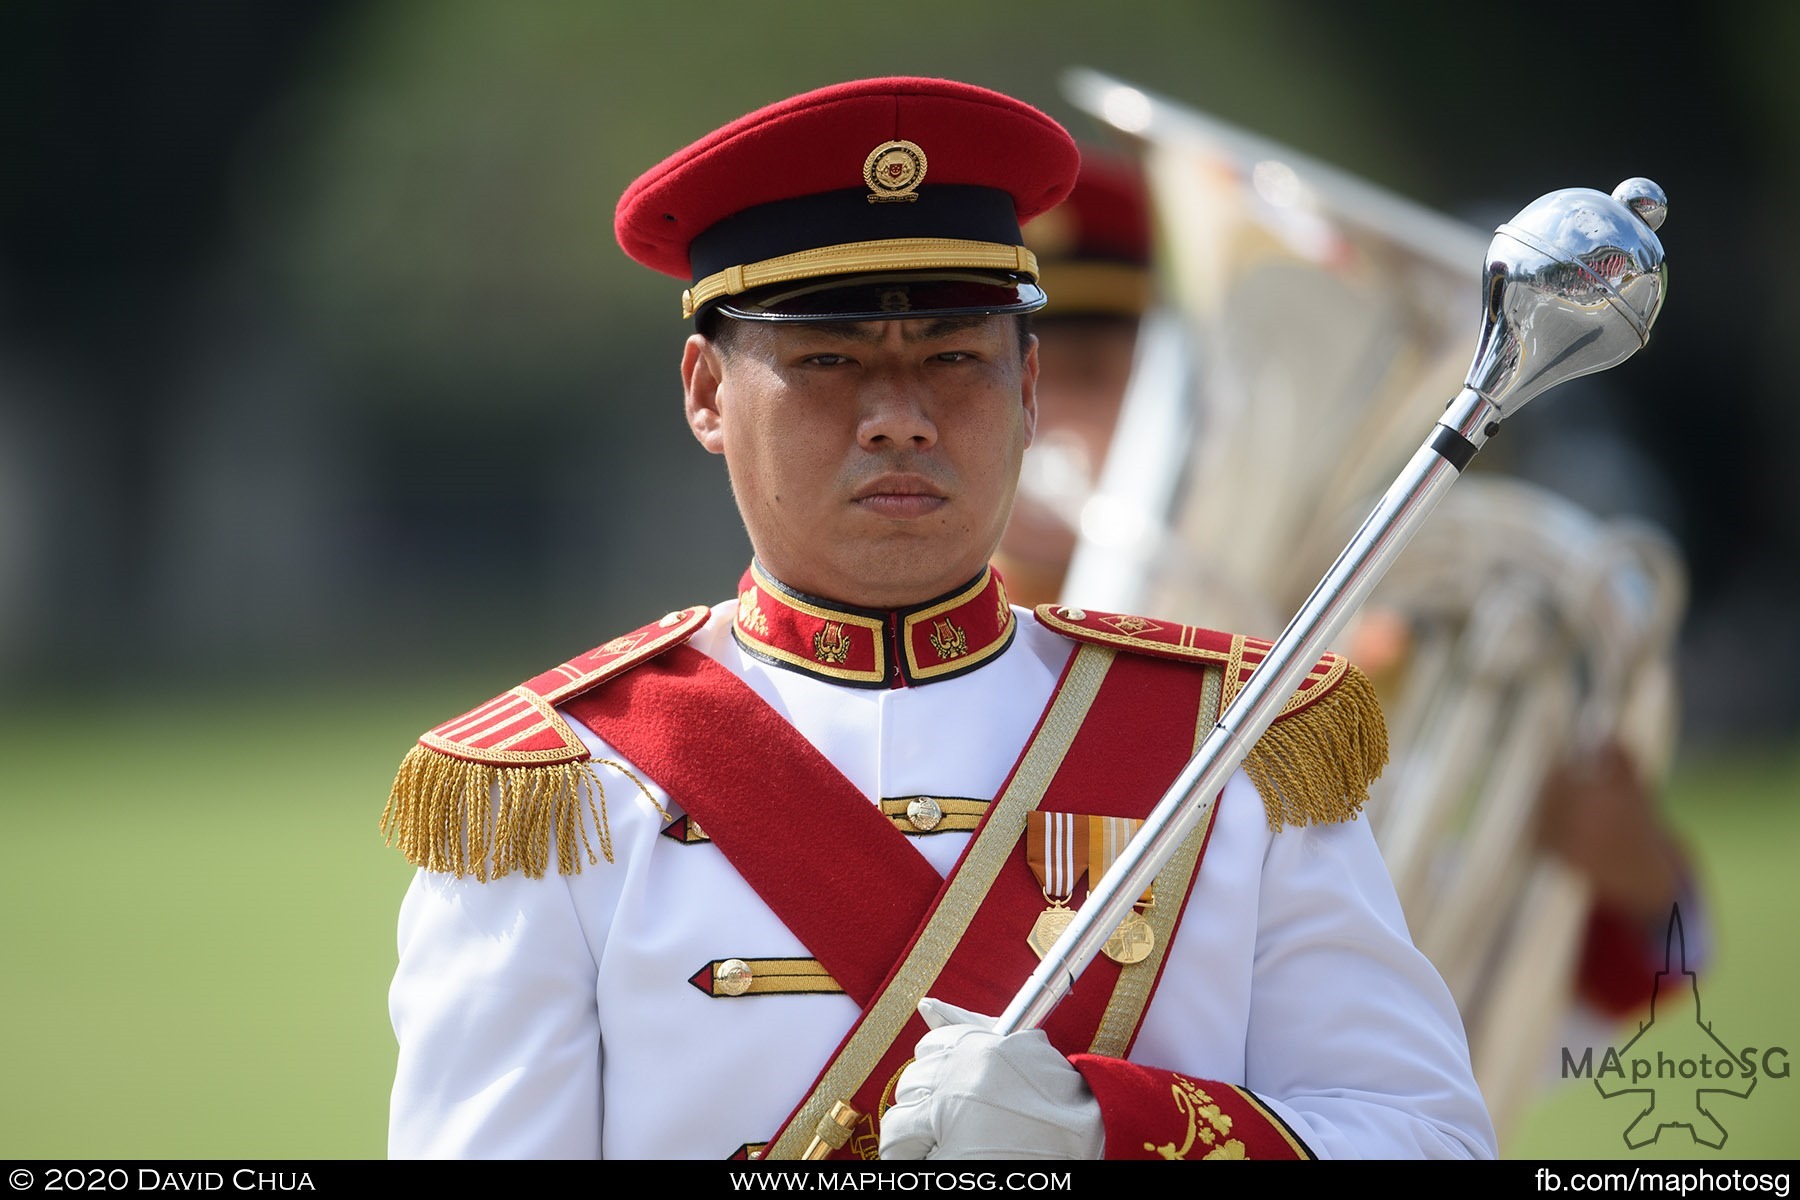 Military Expert 2 (ME2) Jash Chua is the Drum Major for the Combined Band contingent for the Parade@Padang.